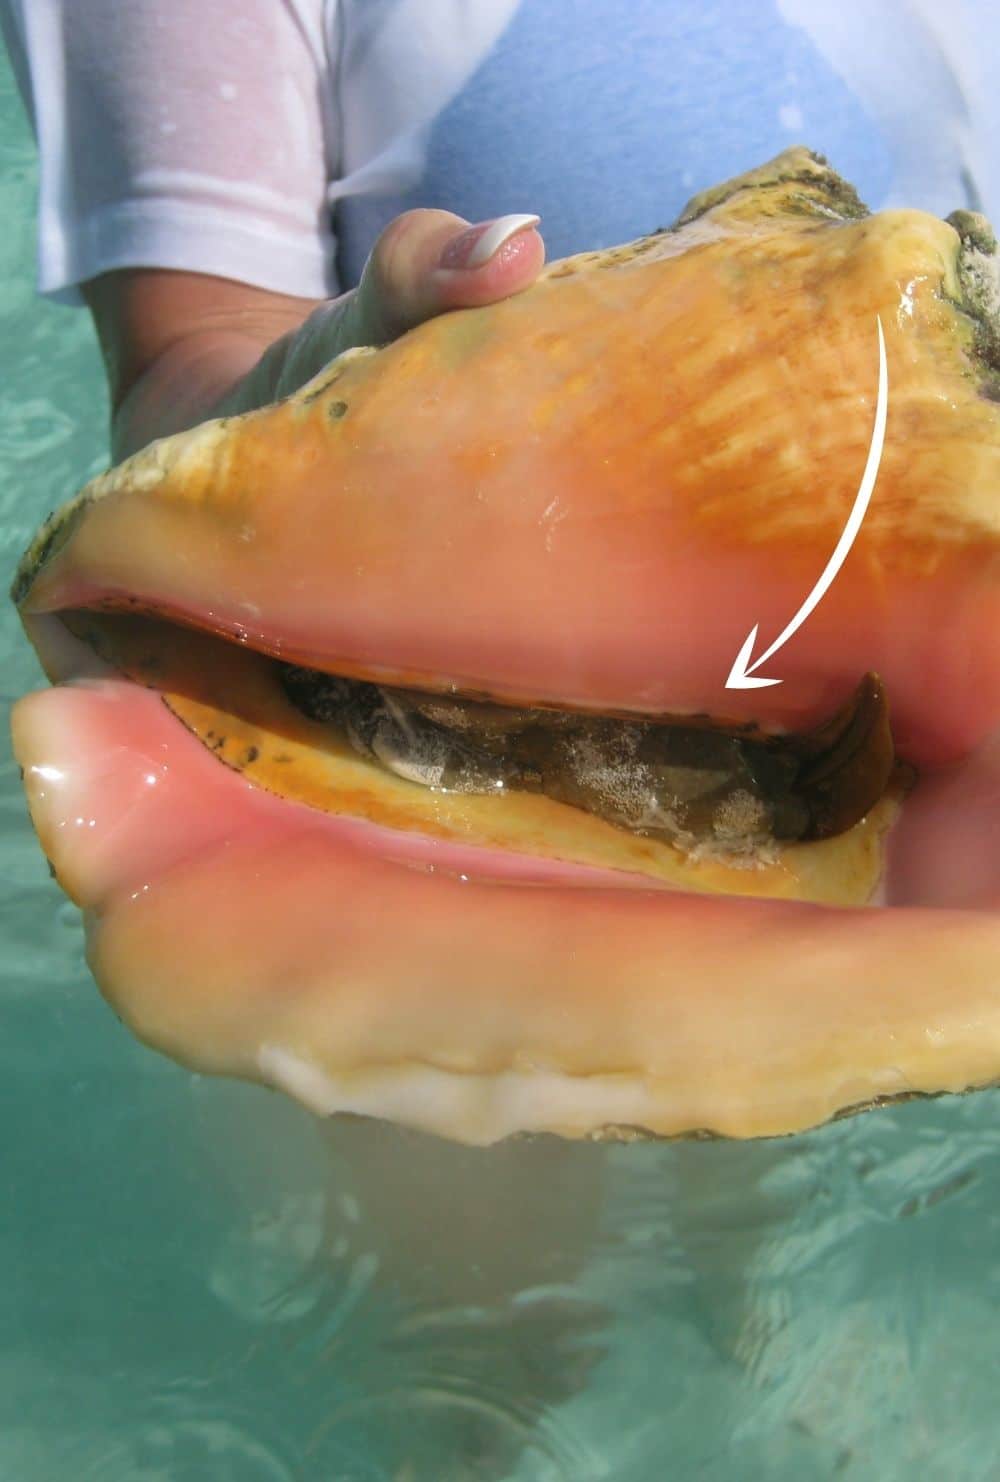 live conch in its shell.